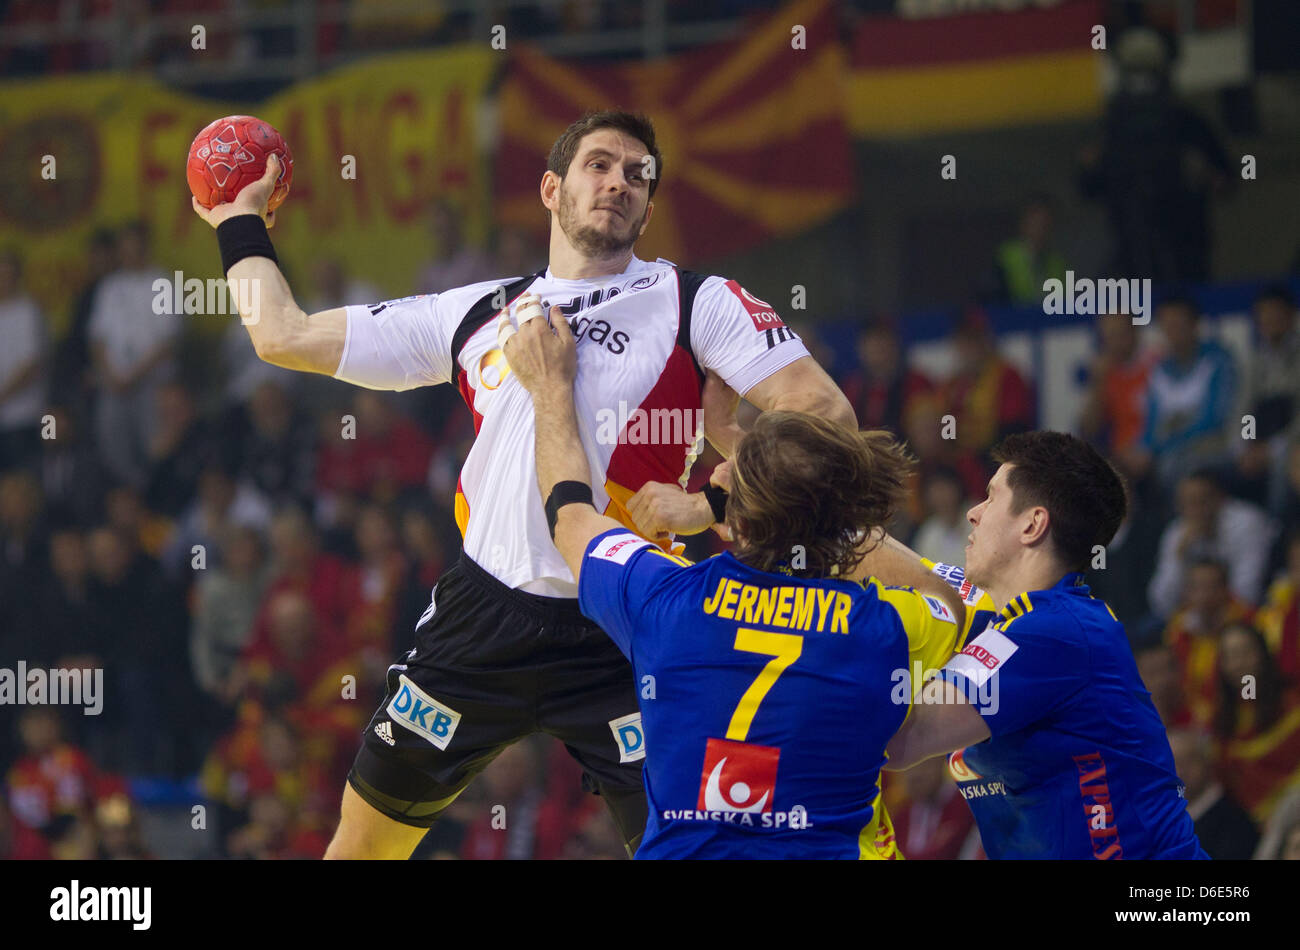 Germany's Michael Haass (L-R) attempts a jump shot against Sweden's Magnus Jernemy and Kim Andersson during the Handball  European Championship group B match between Germany and Sweden in Nis, Serbia, 19 January 2012. Photo: Jens Wolf Stock Photo